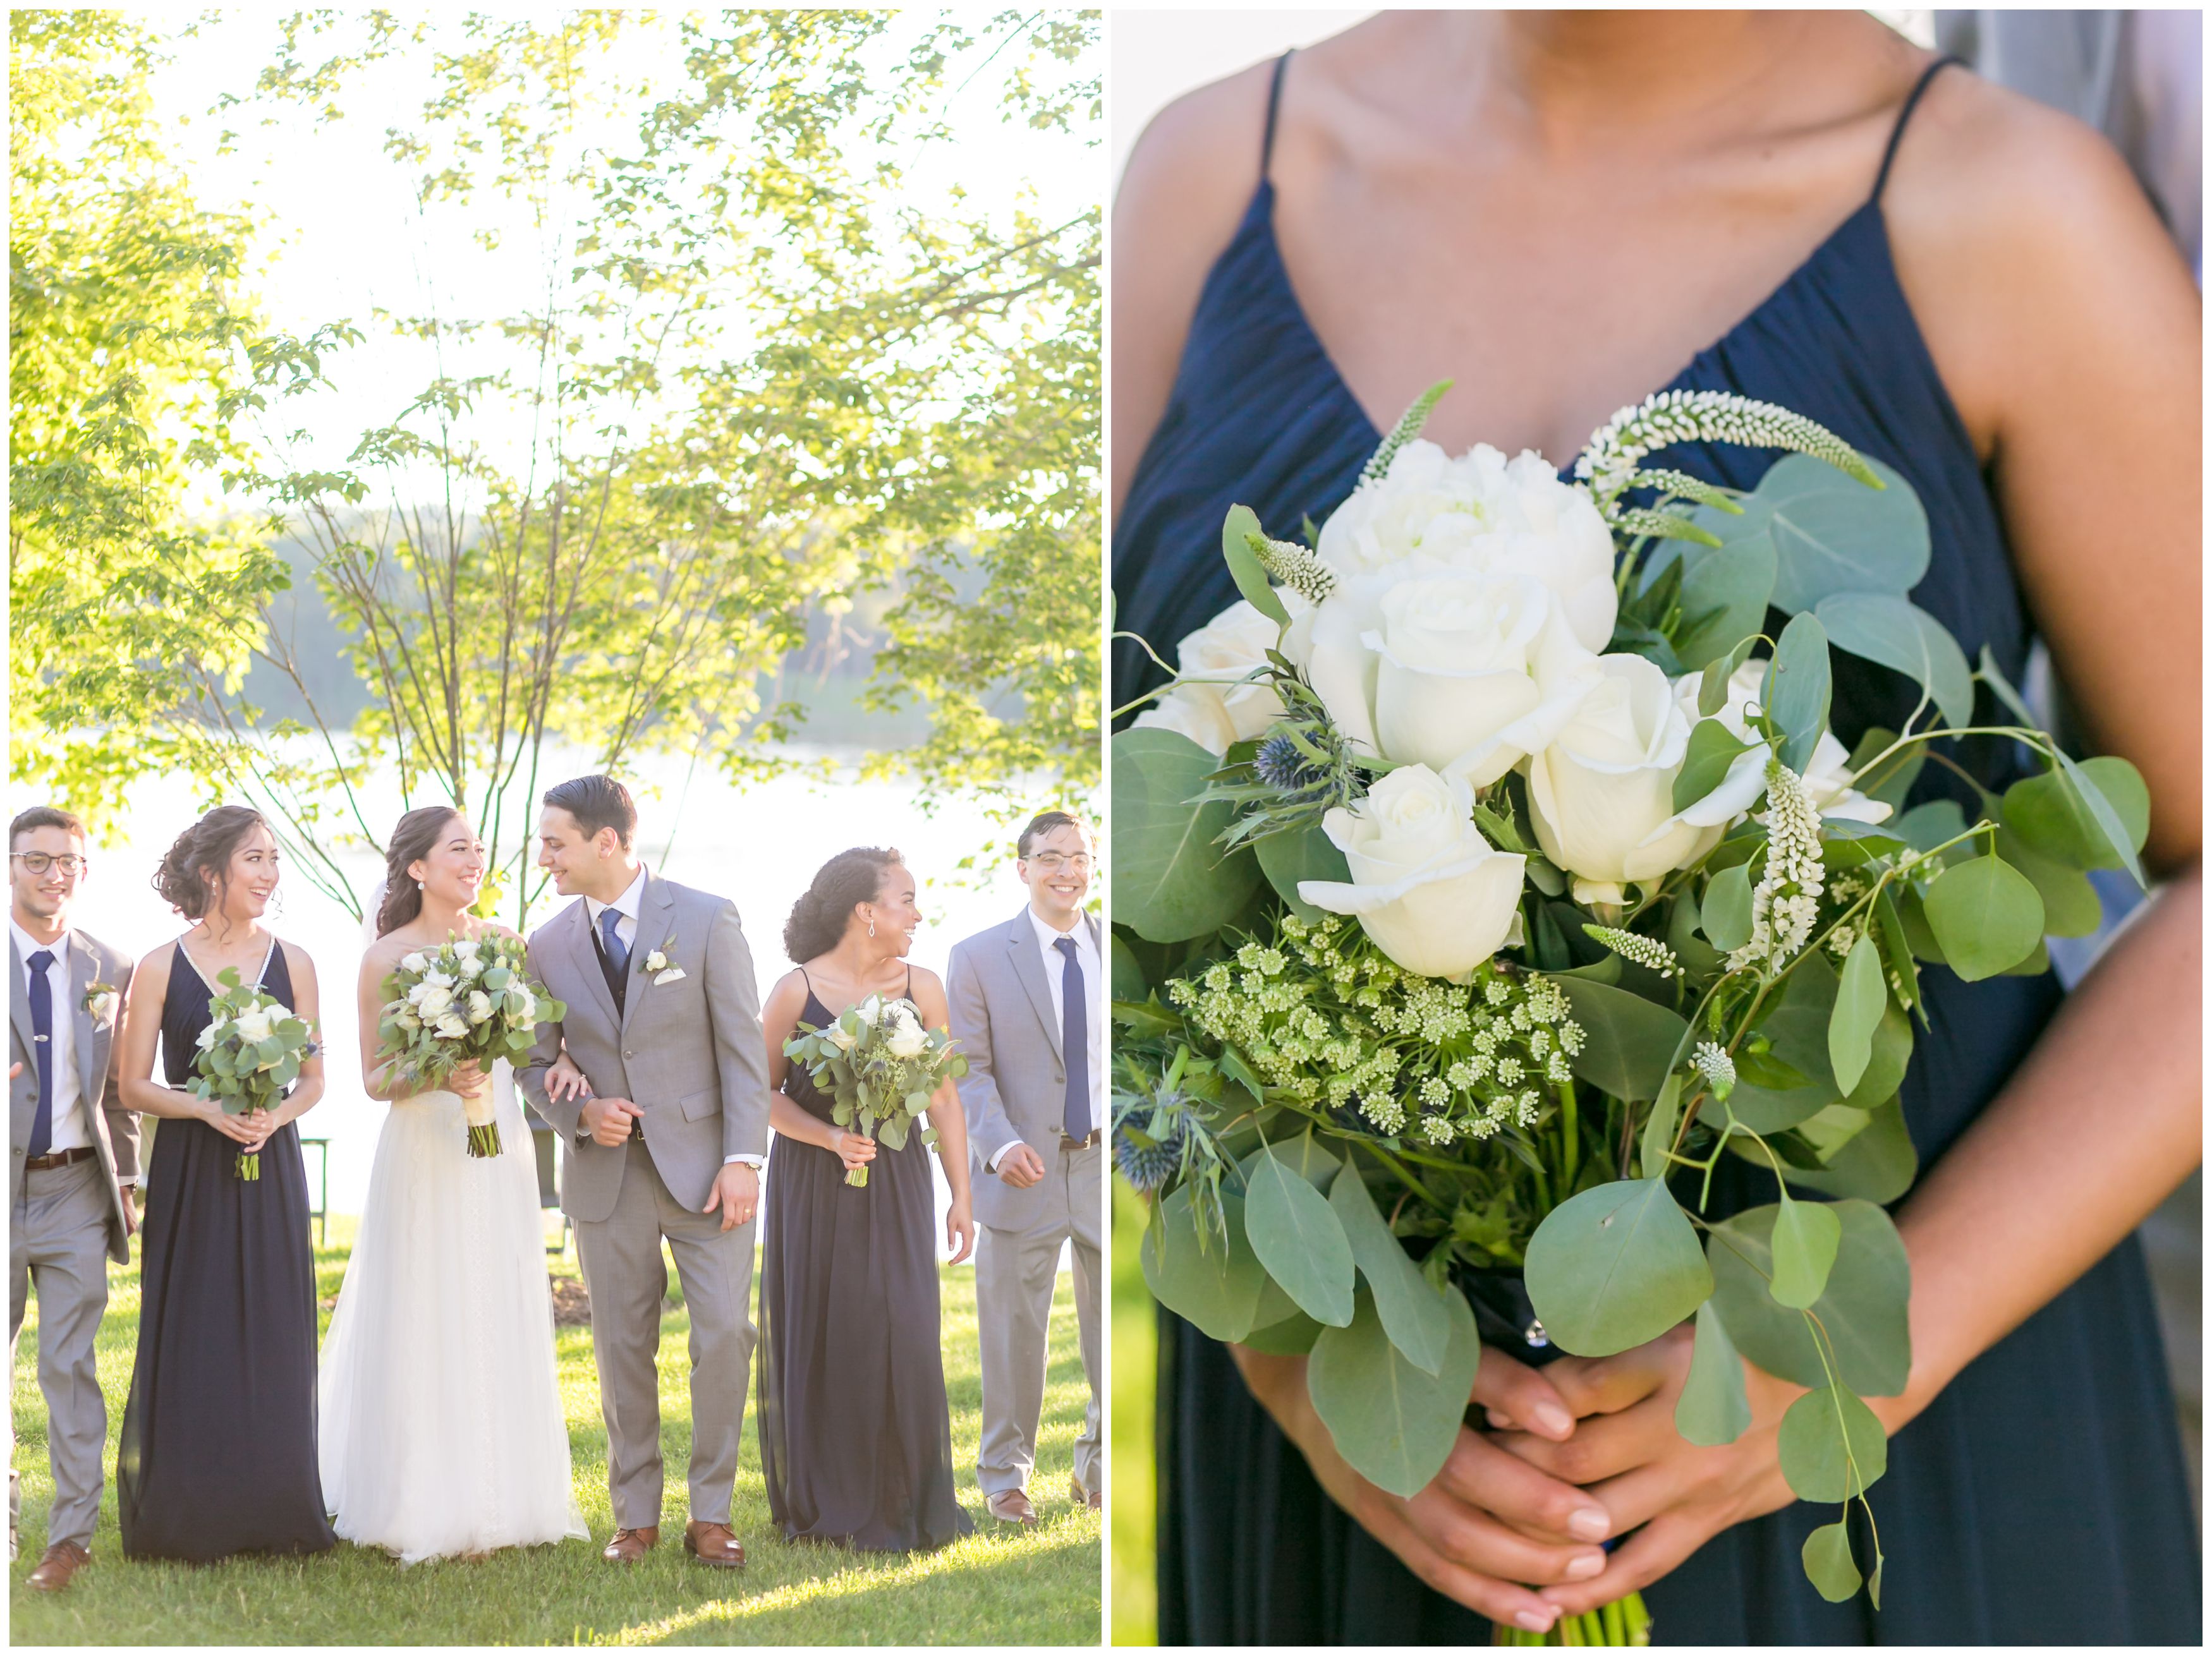 Bridal Party with bridesmaid detail at outdoor lakeside wedding